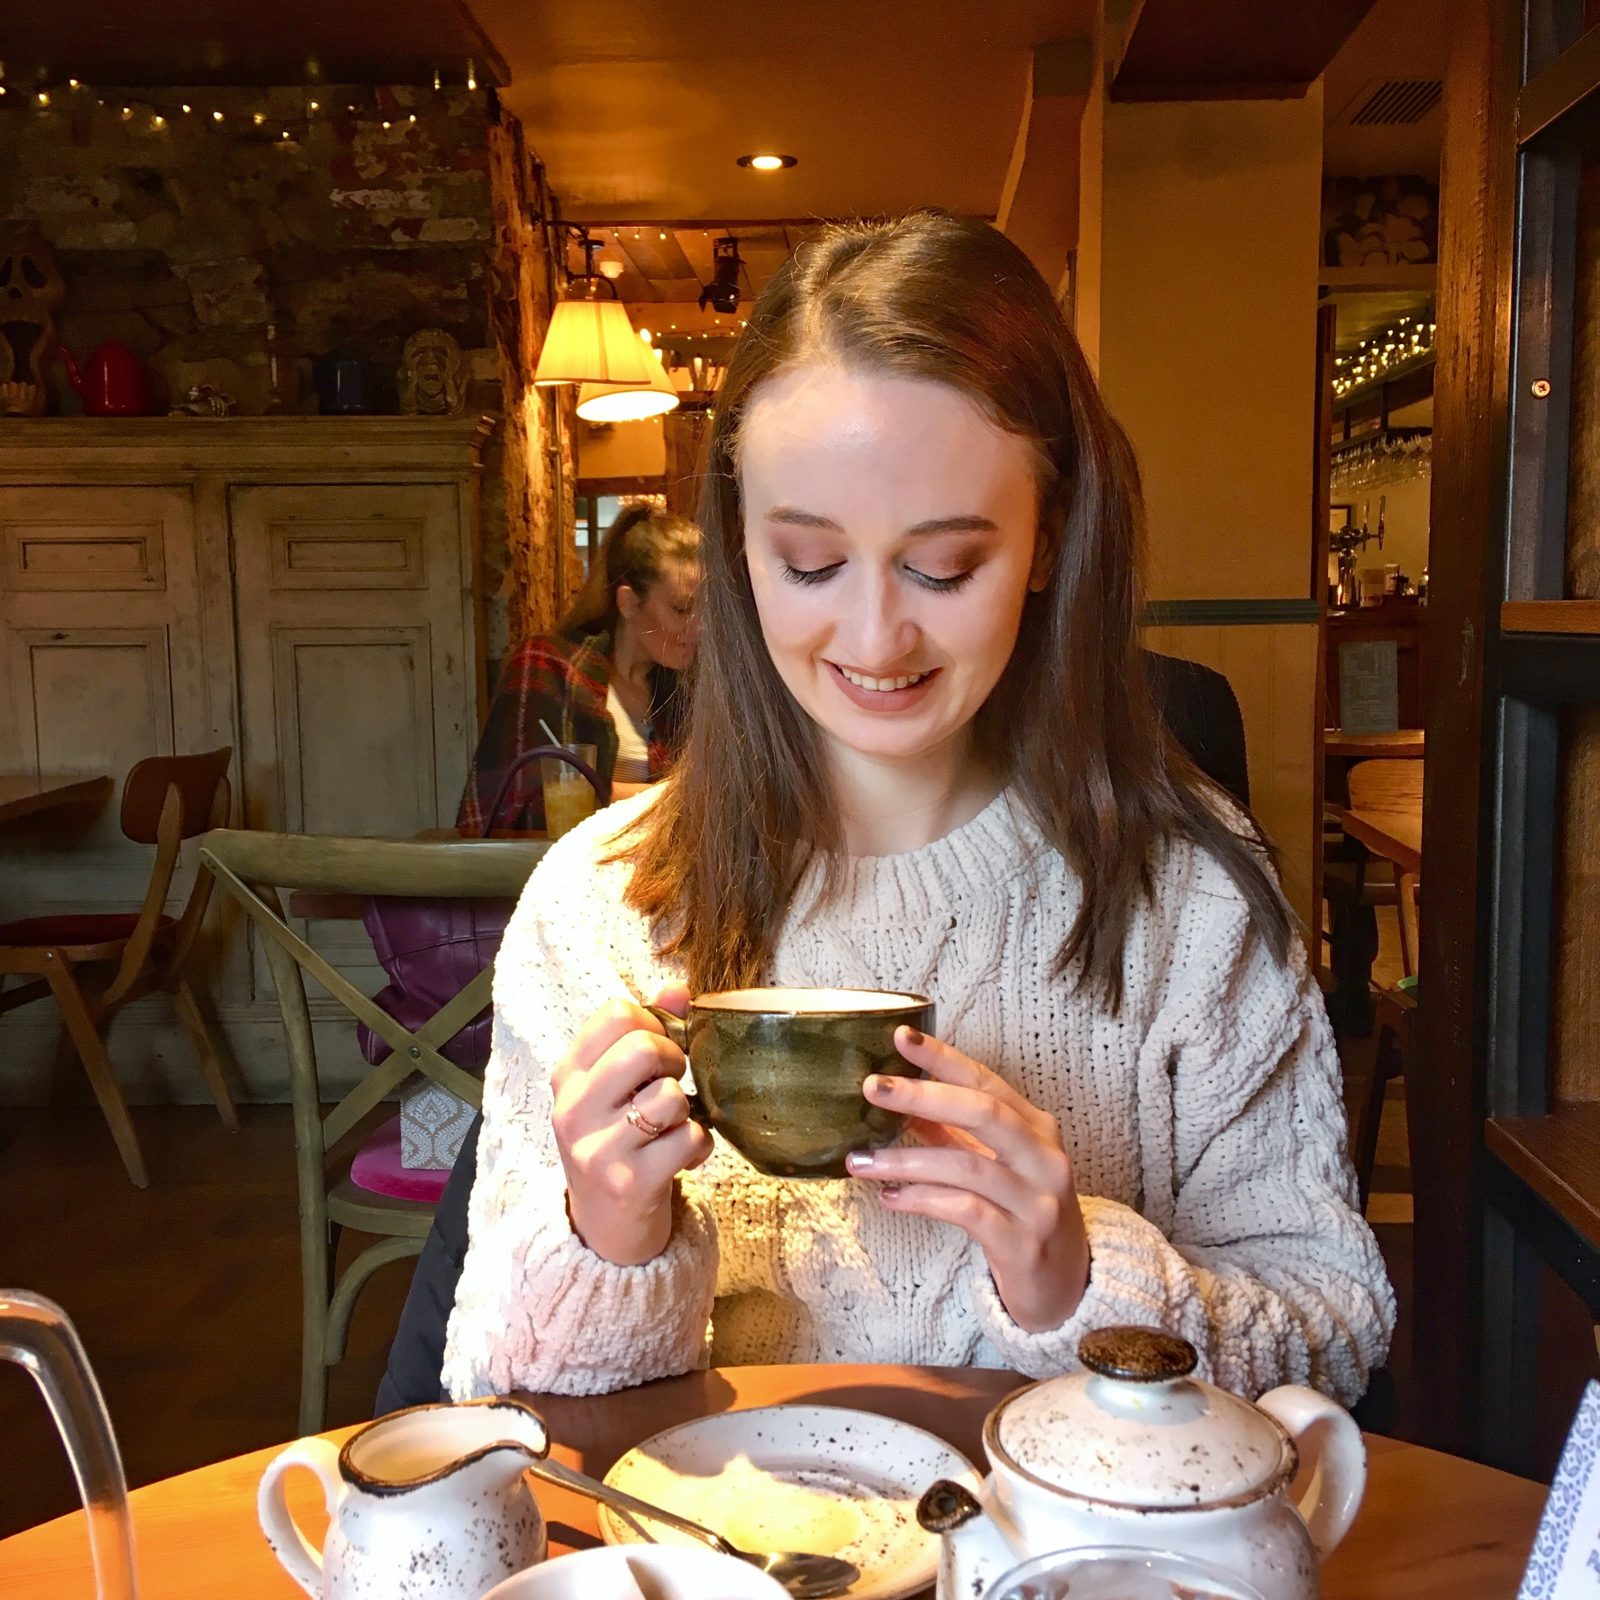 pippa sat at table wearing jumper and looking down at tea cup in hands, with tea pot on table in front